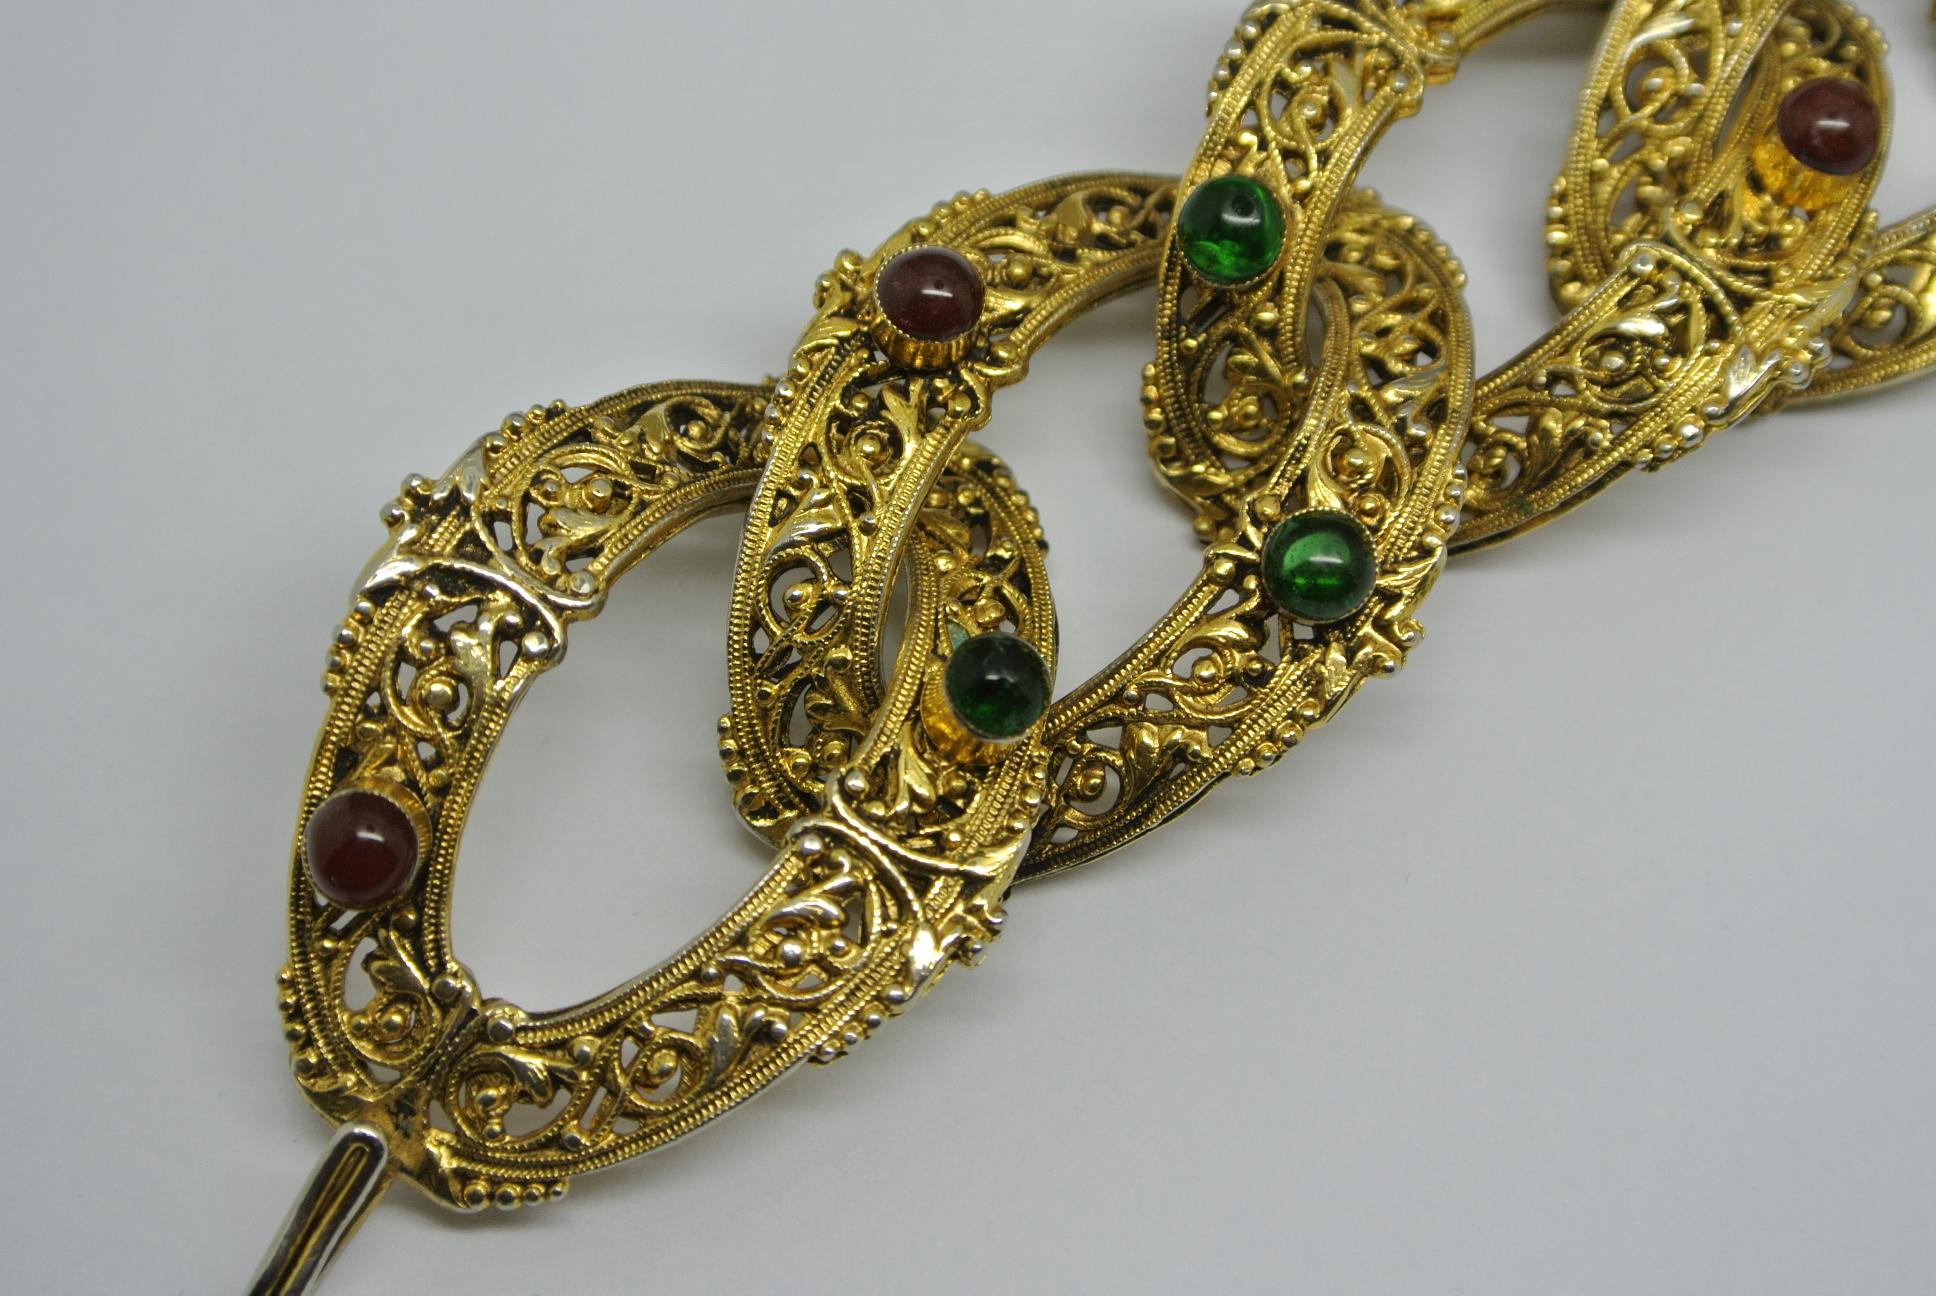 Vintage Chanel bracelet, 
comes with filigree design. 
In byzantine style. 
The length is 6-8 inches.